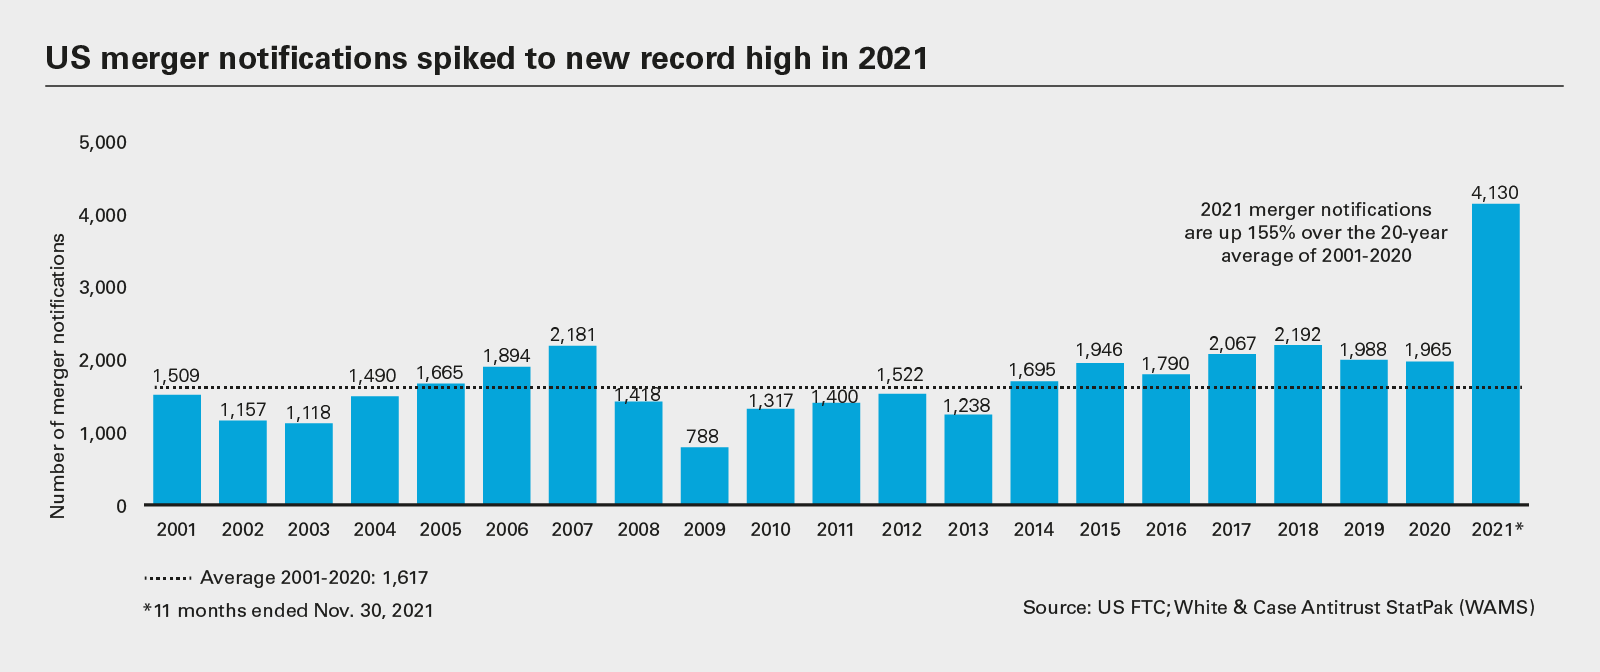 US merger notifications spiked to new record high in 2021 (PDF)